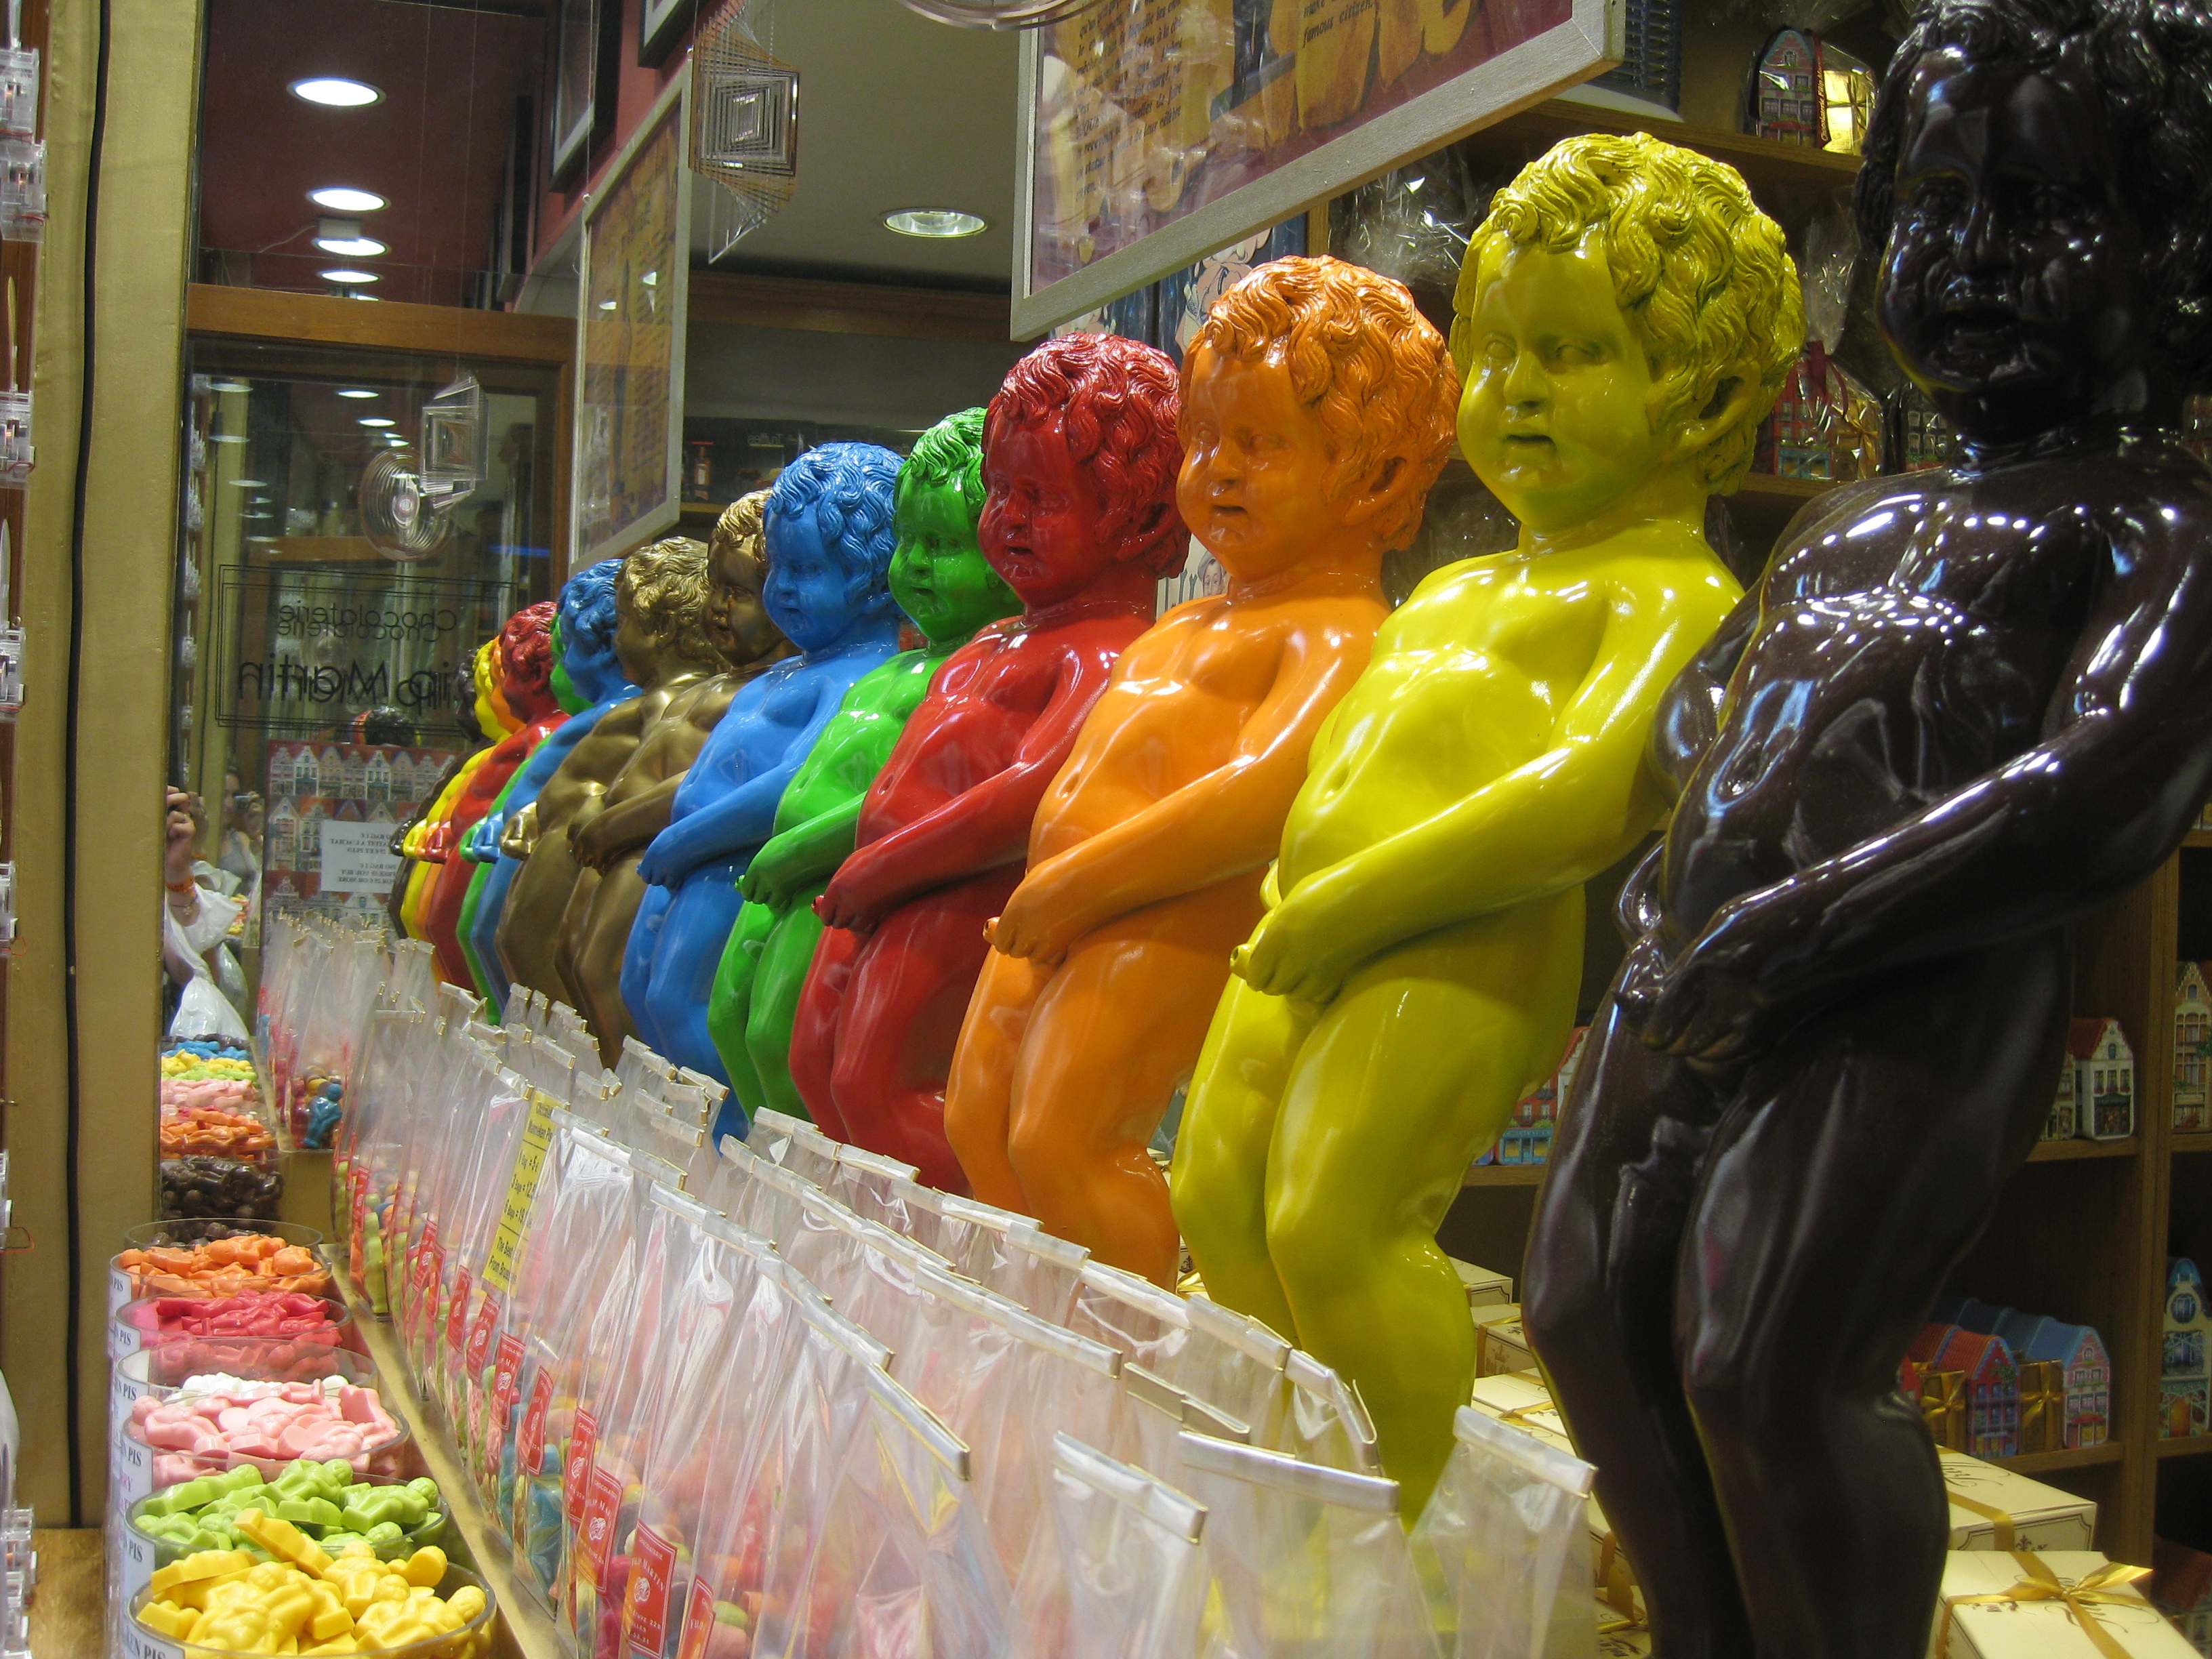 He's everywhere!  Sculptures of the Manneken Pis in a chocolate shop.